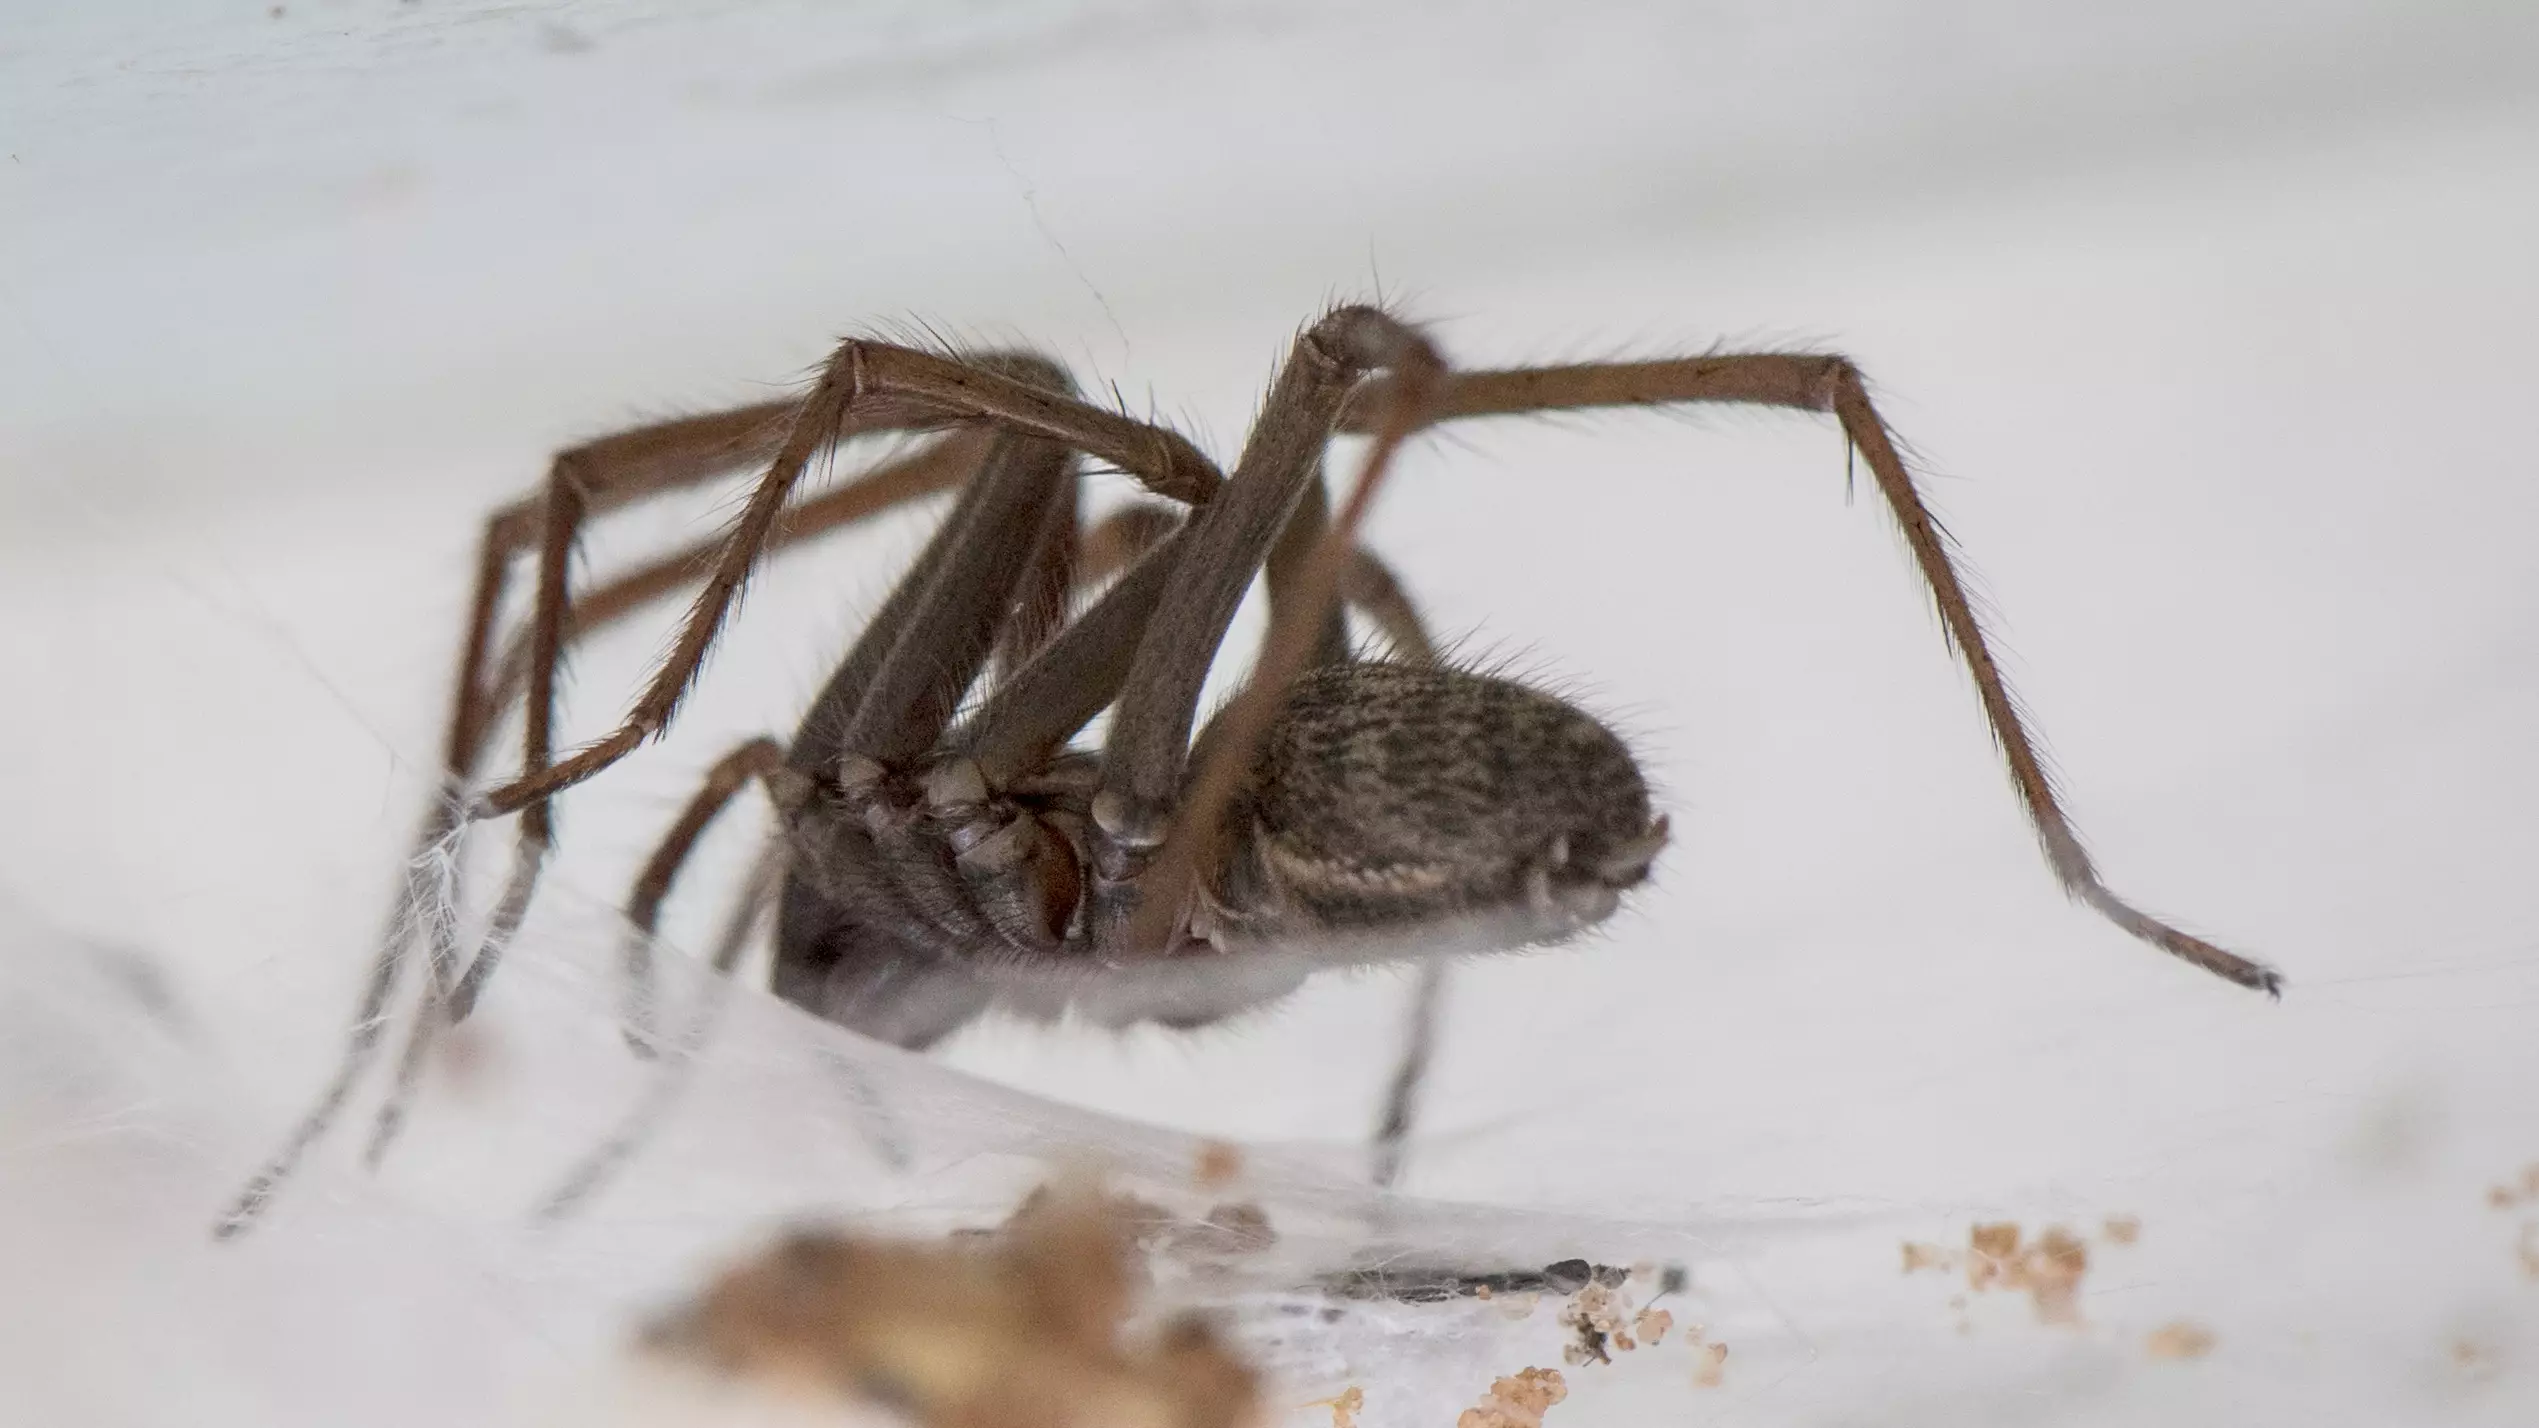 Sex-Crazed 'Hand-Sized' Giant Spiders Invade UK Homes